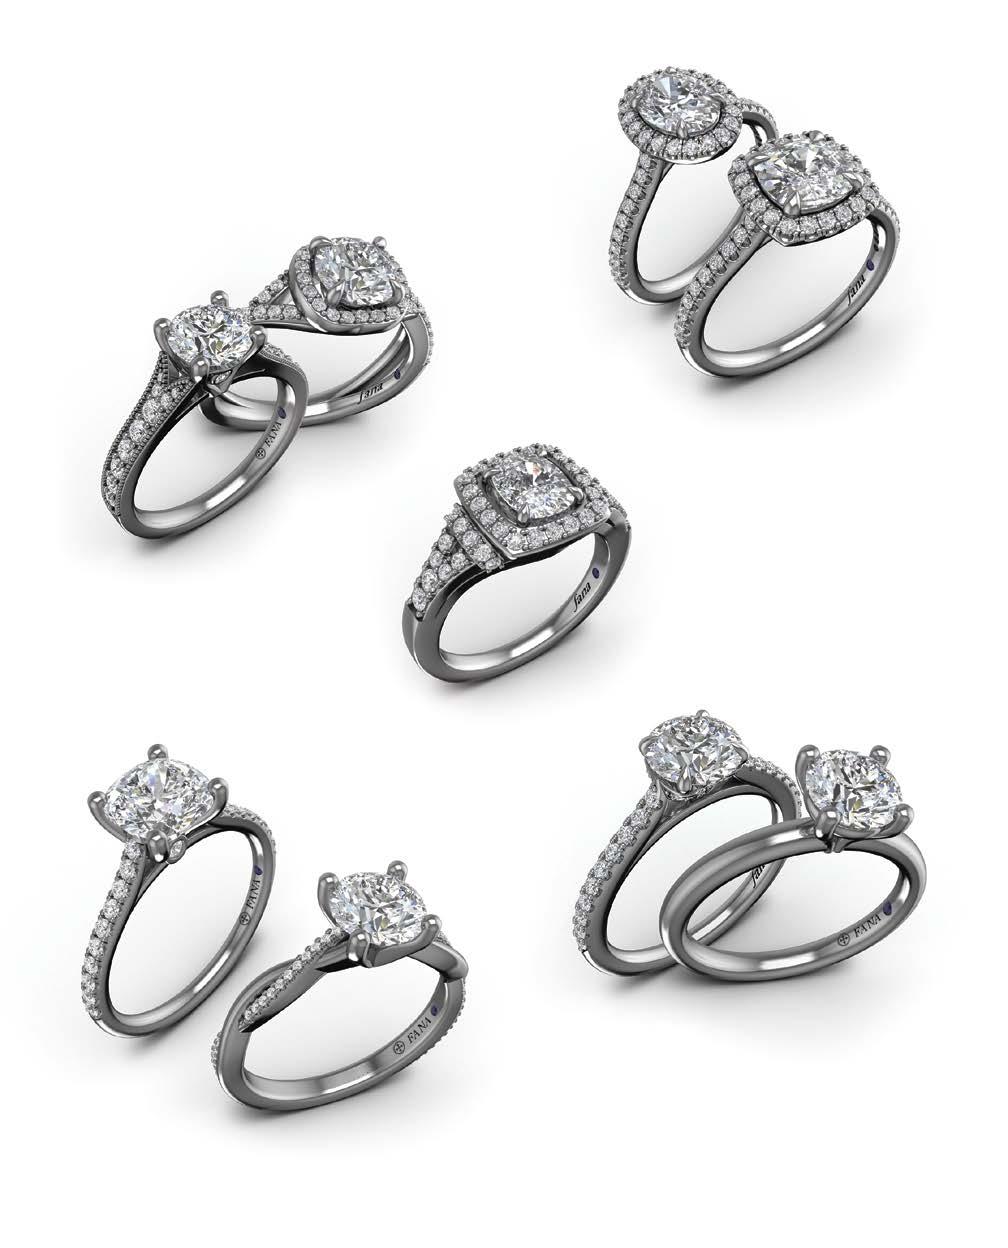 1 2 3 4 5 8 6 9 7 14K gold and diamond engagement ring settings, center diamonds sold separately. 1. Delicate oval shaped halo and pavé band (S2792) $1495. 2. Bold cushion halo with pavé band (S2790) $1495.